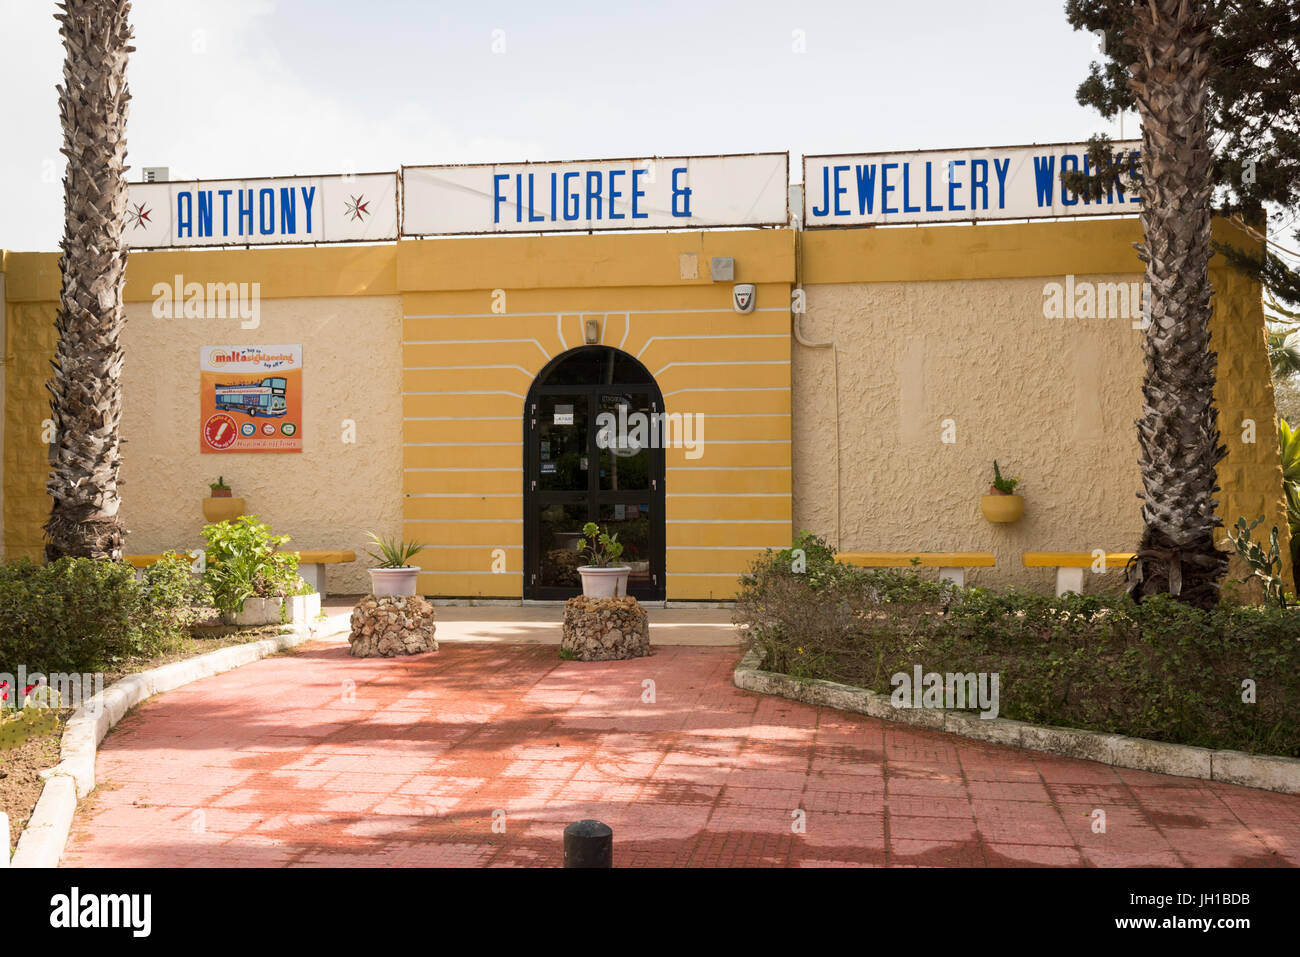 Anthony Filgree and jewellery craft shop at the artisan village and Ta' Qali Crafts Centre and artisan village Malta in old airfield nissen huts Stock Photo